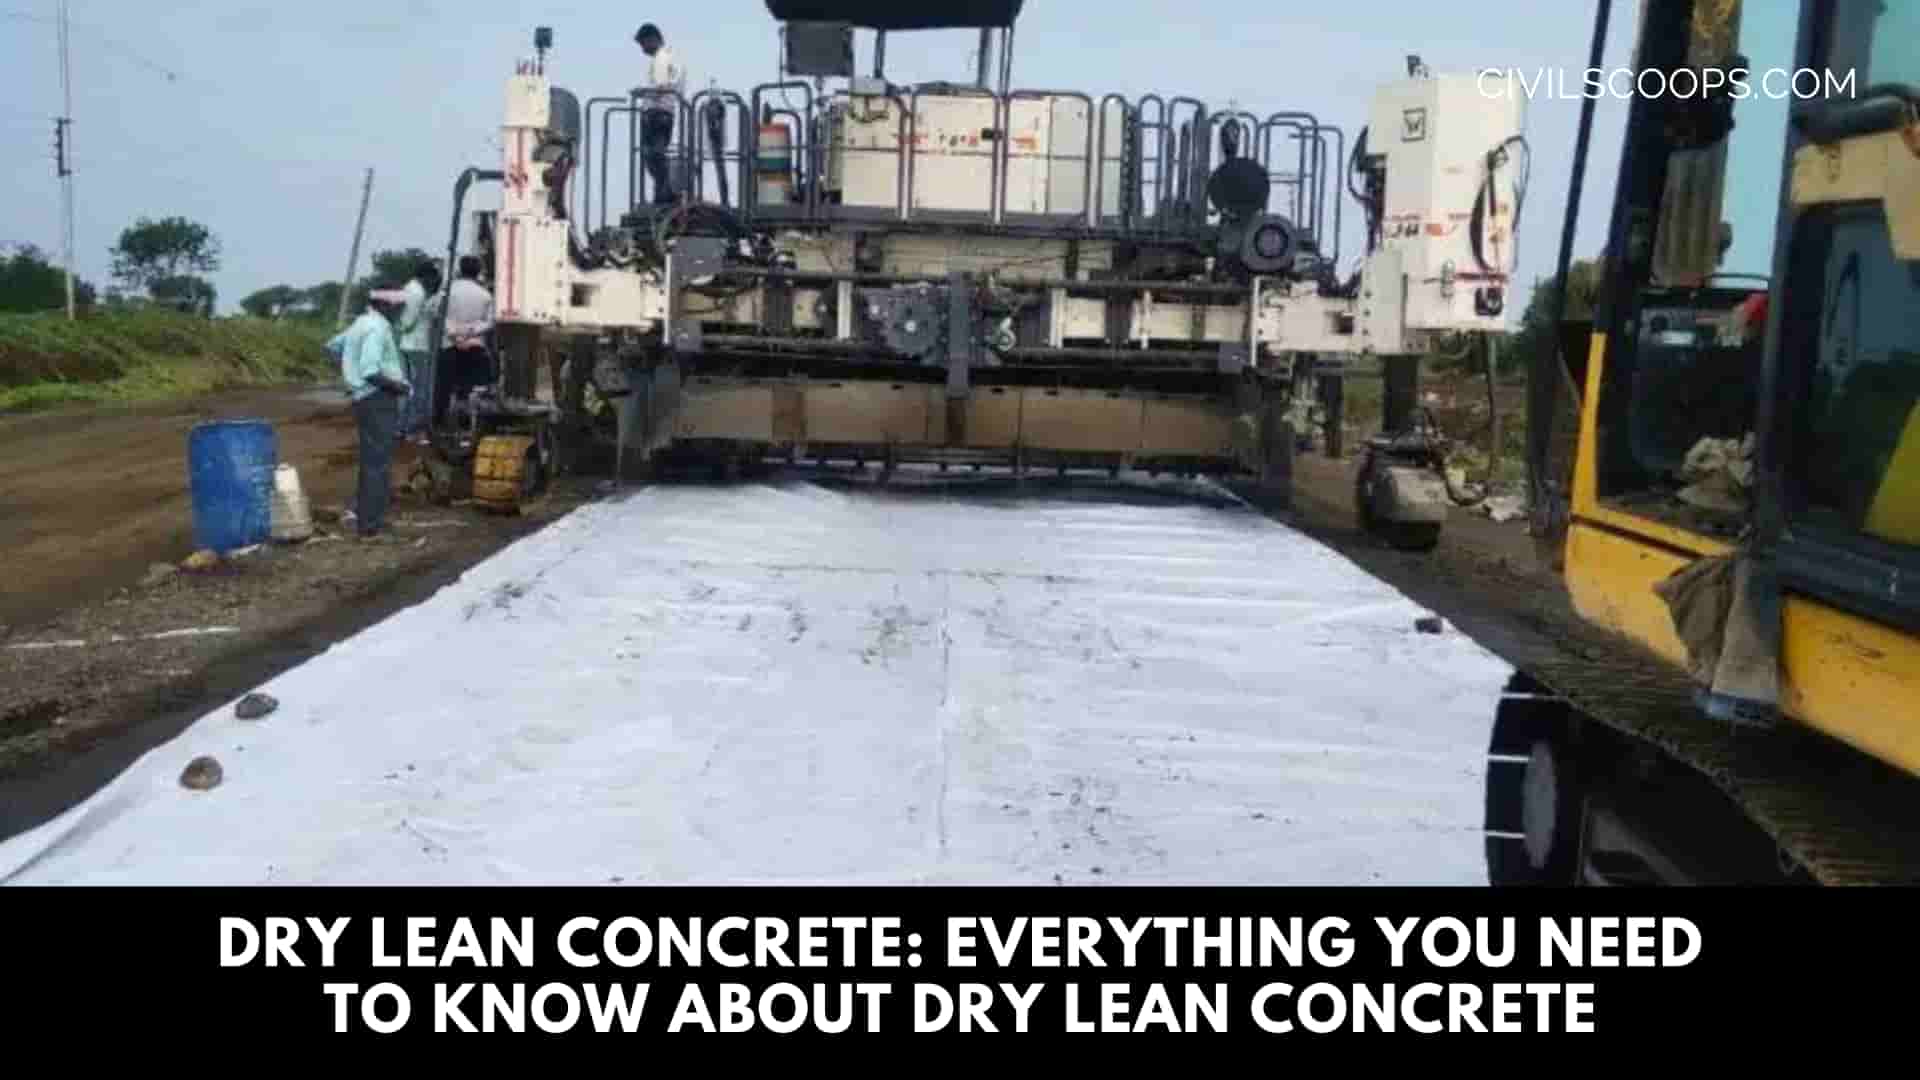 Dry Lean Concrete: Everything You Need to Know About Dry Lean Concrete